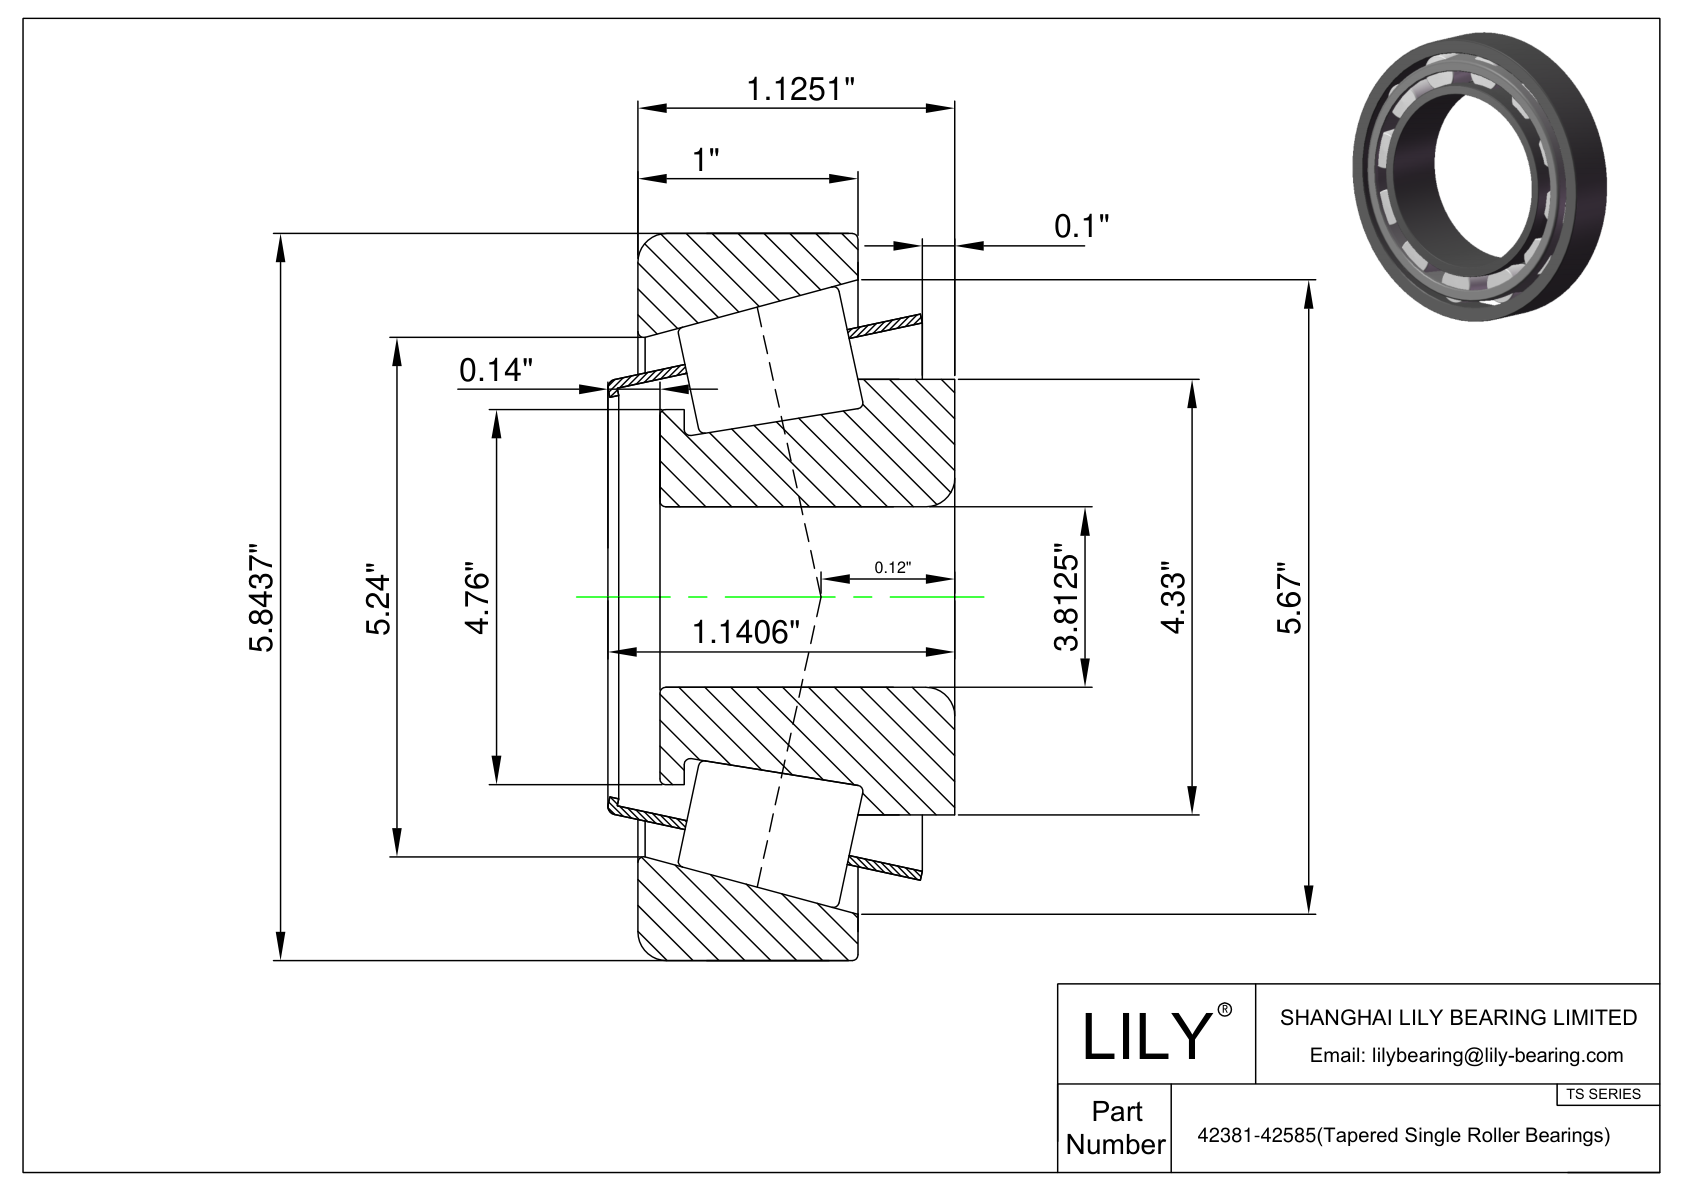 42381-42585 TS (Tapered Single Roller Bearings) (Imperial) cad drawing